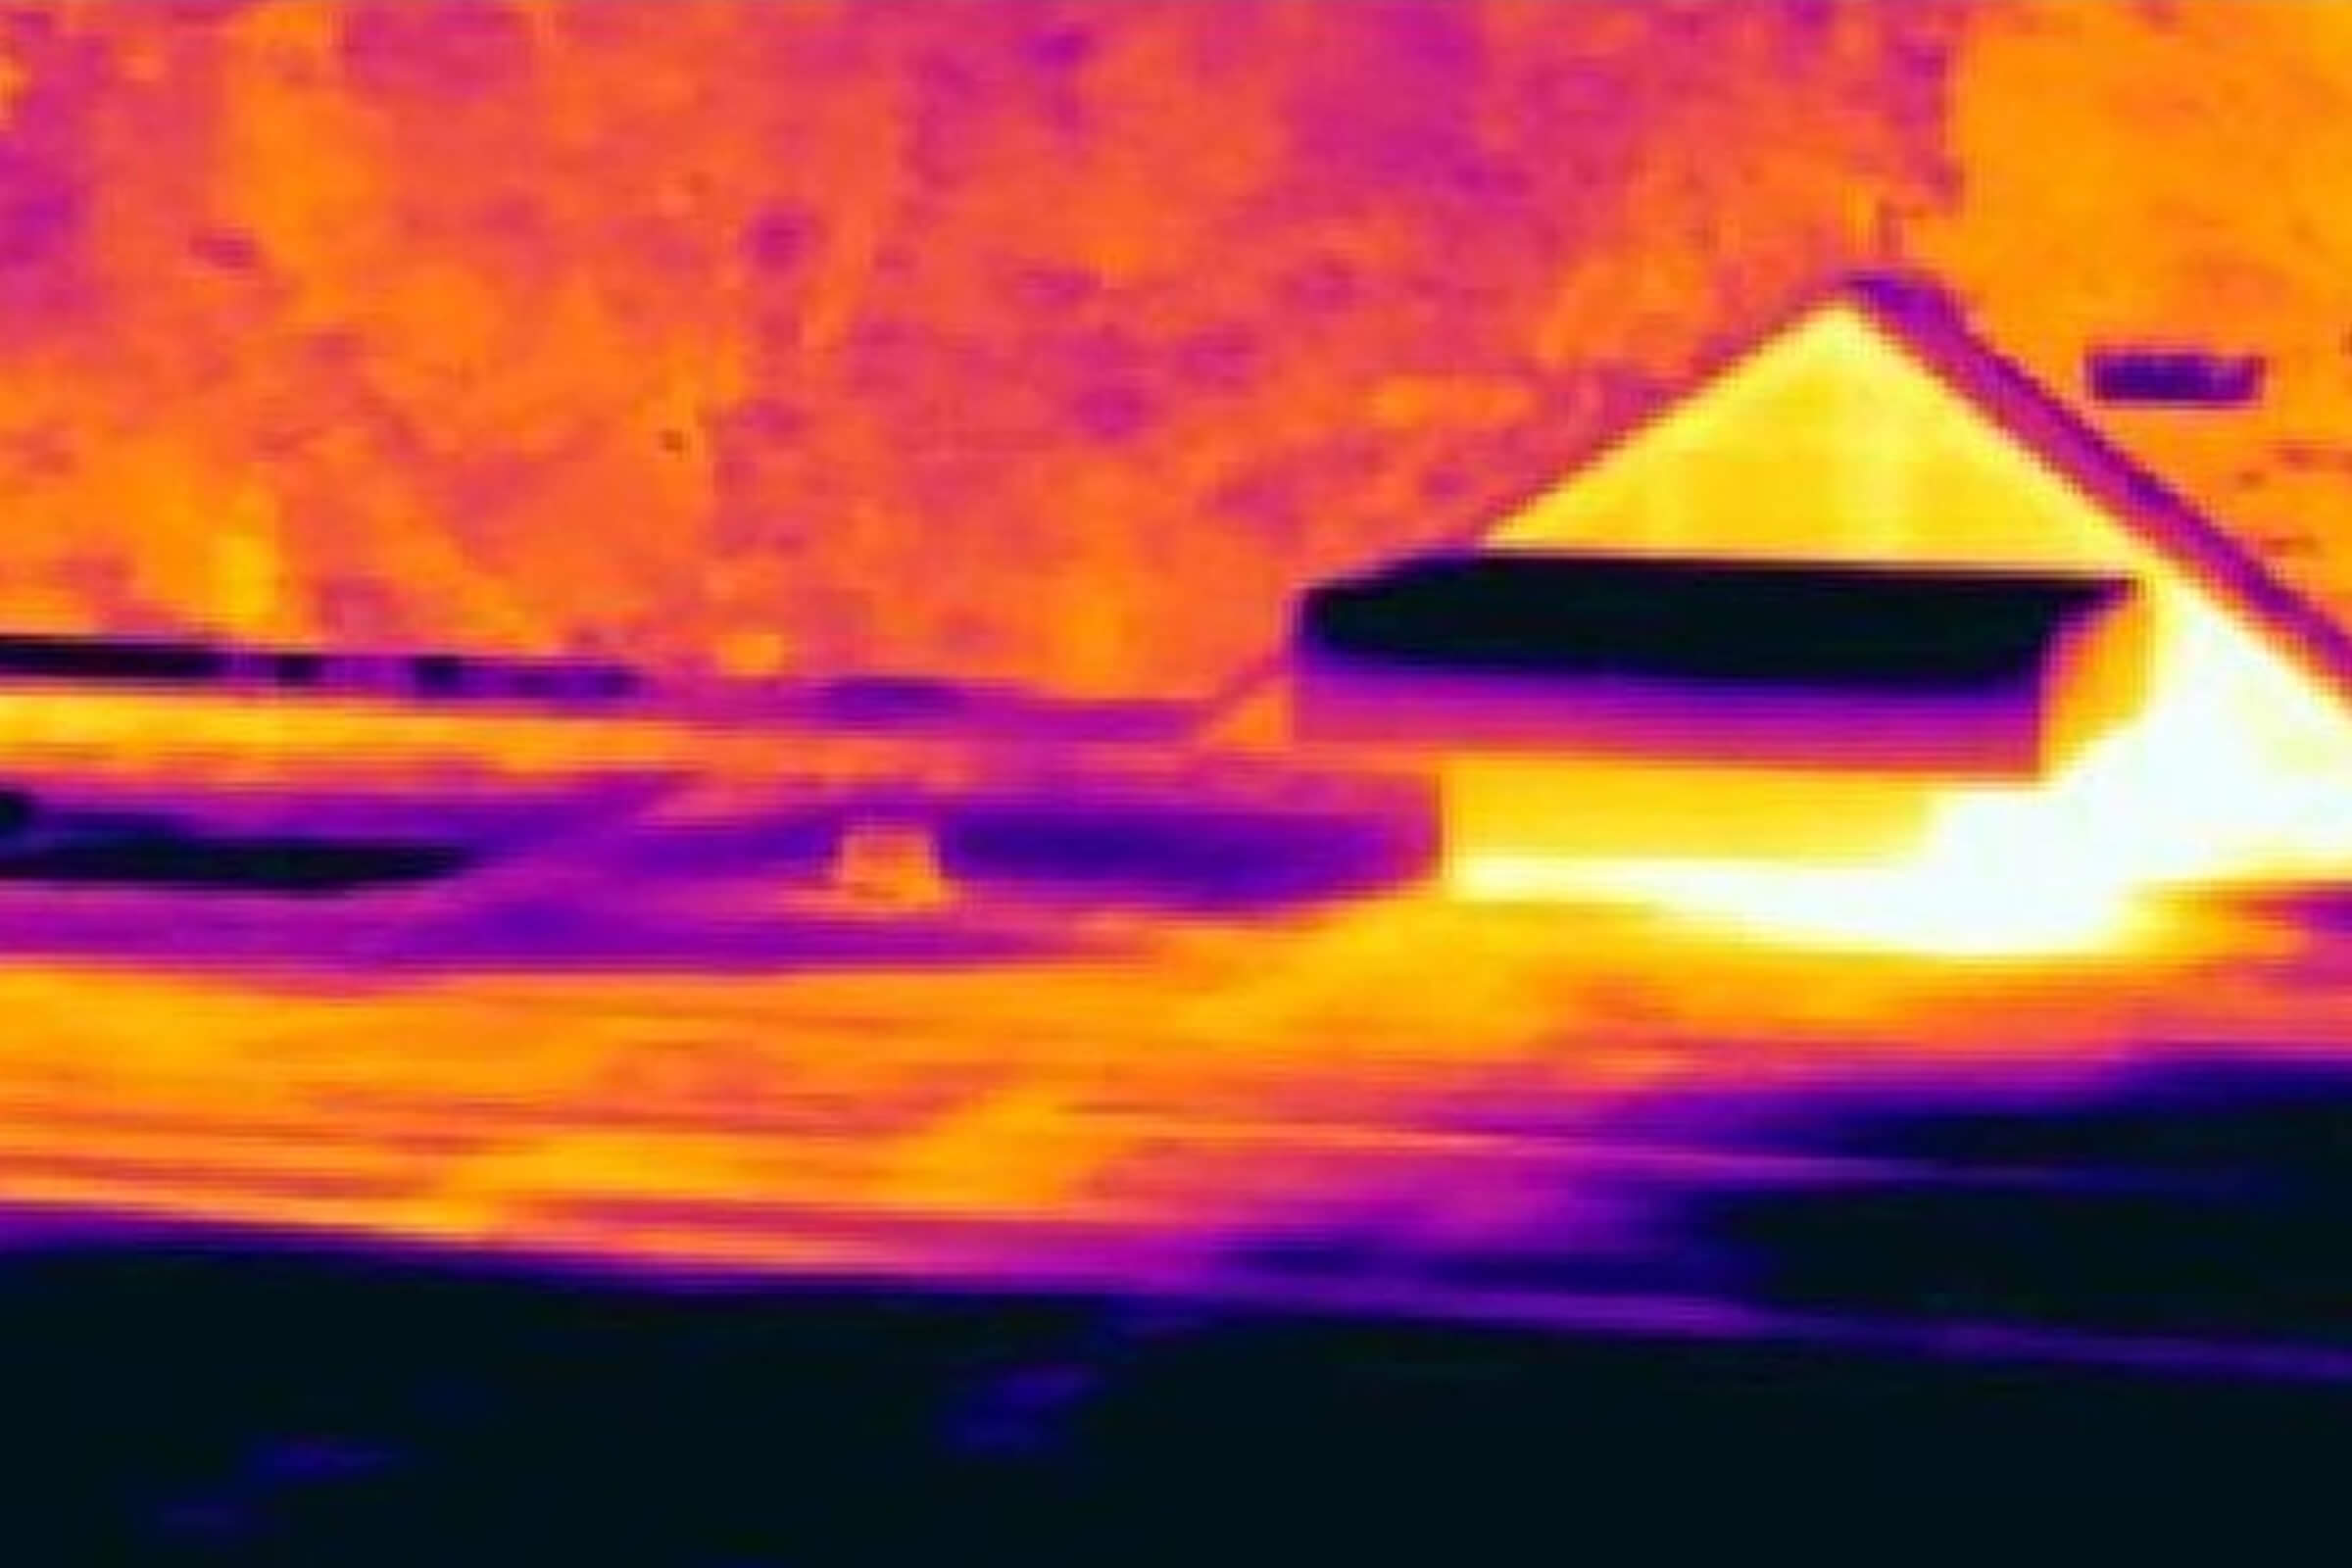 leak investigation and thermography services, Edmonton